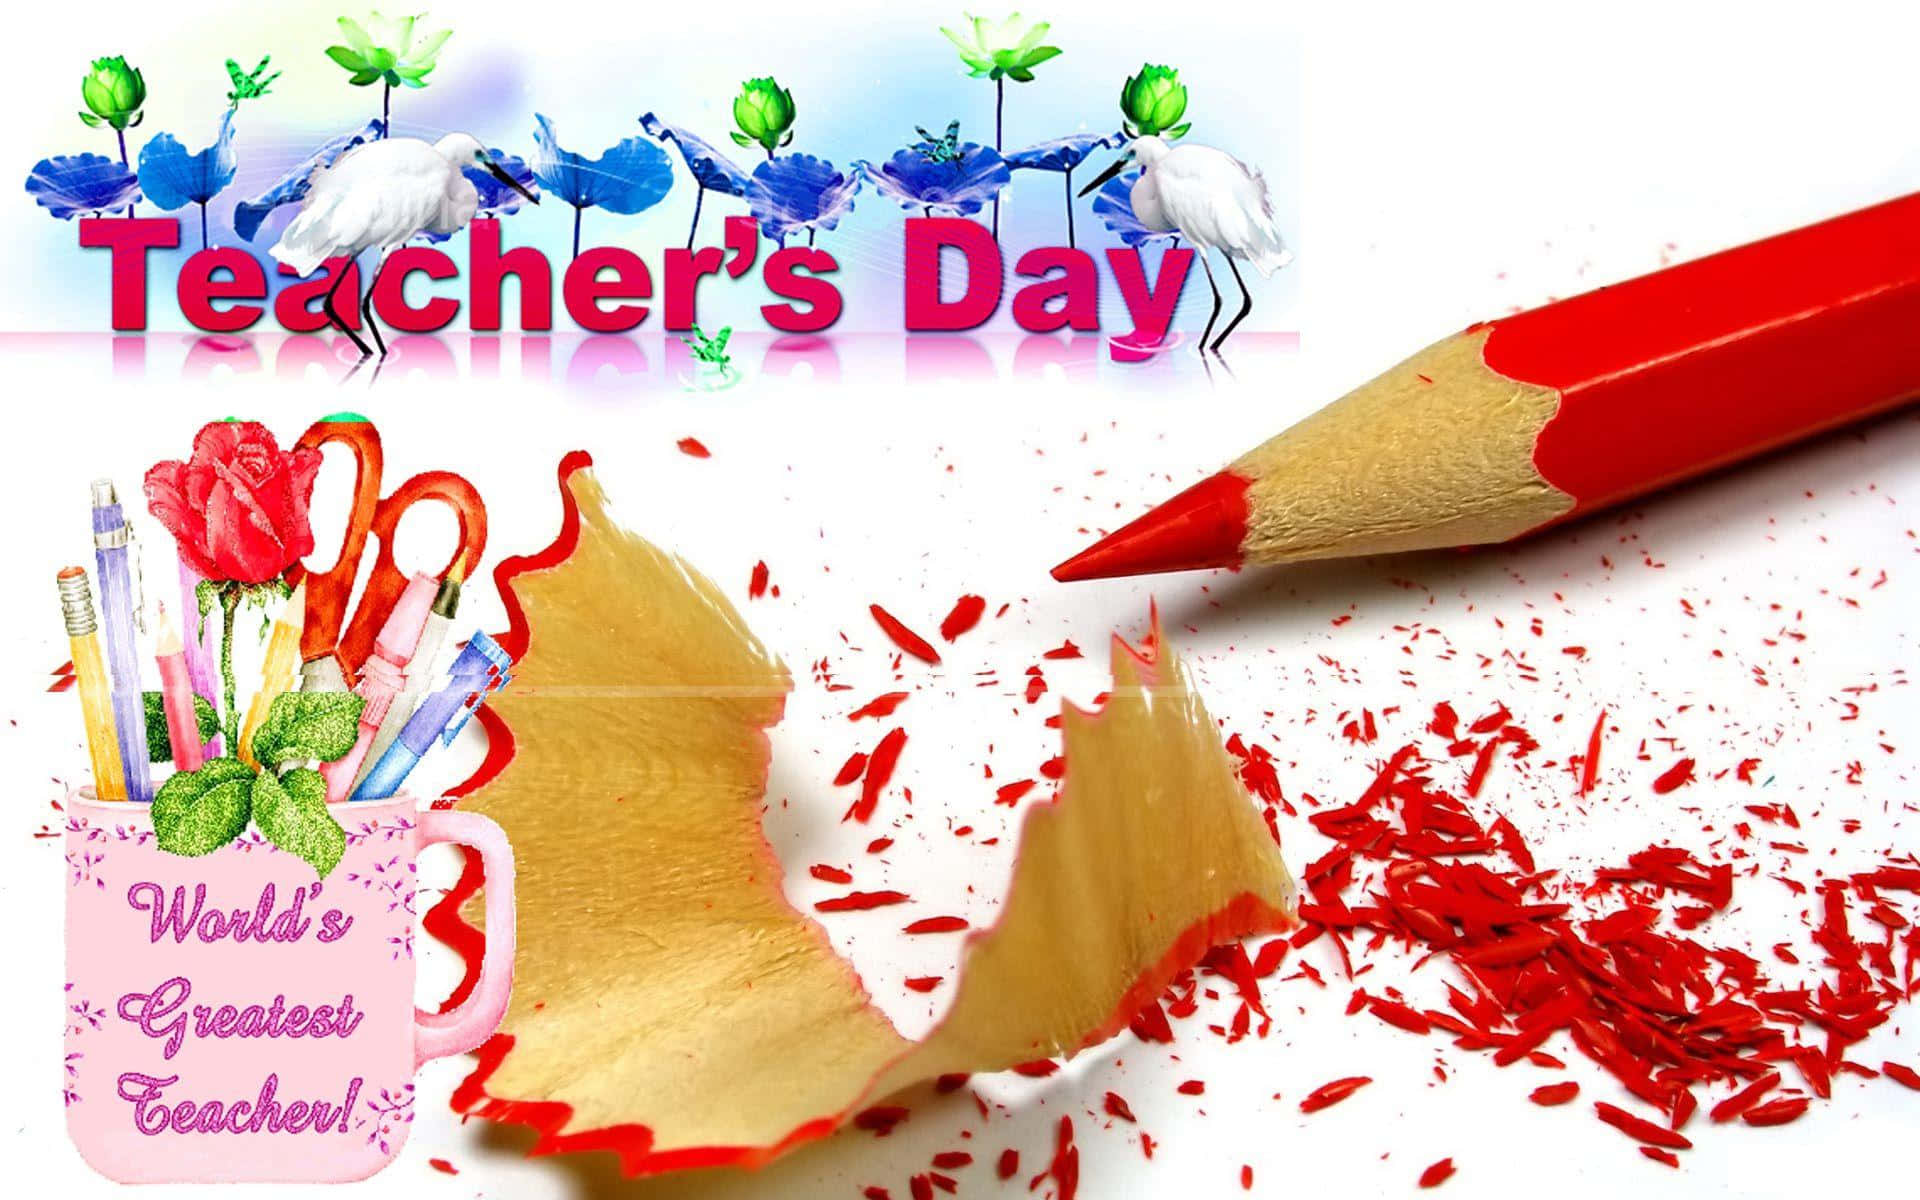 Happy Teachers Day To All!